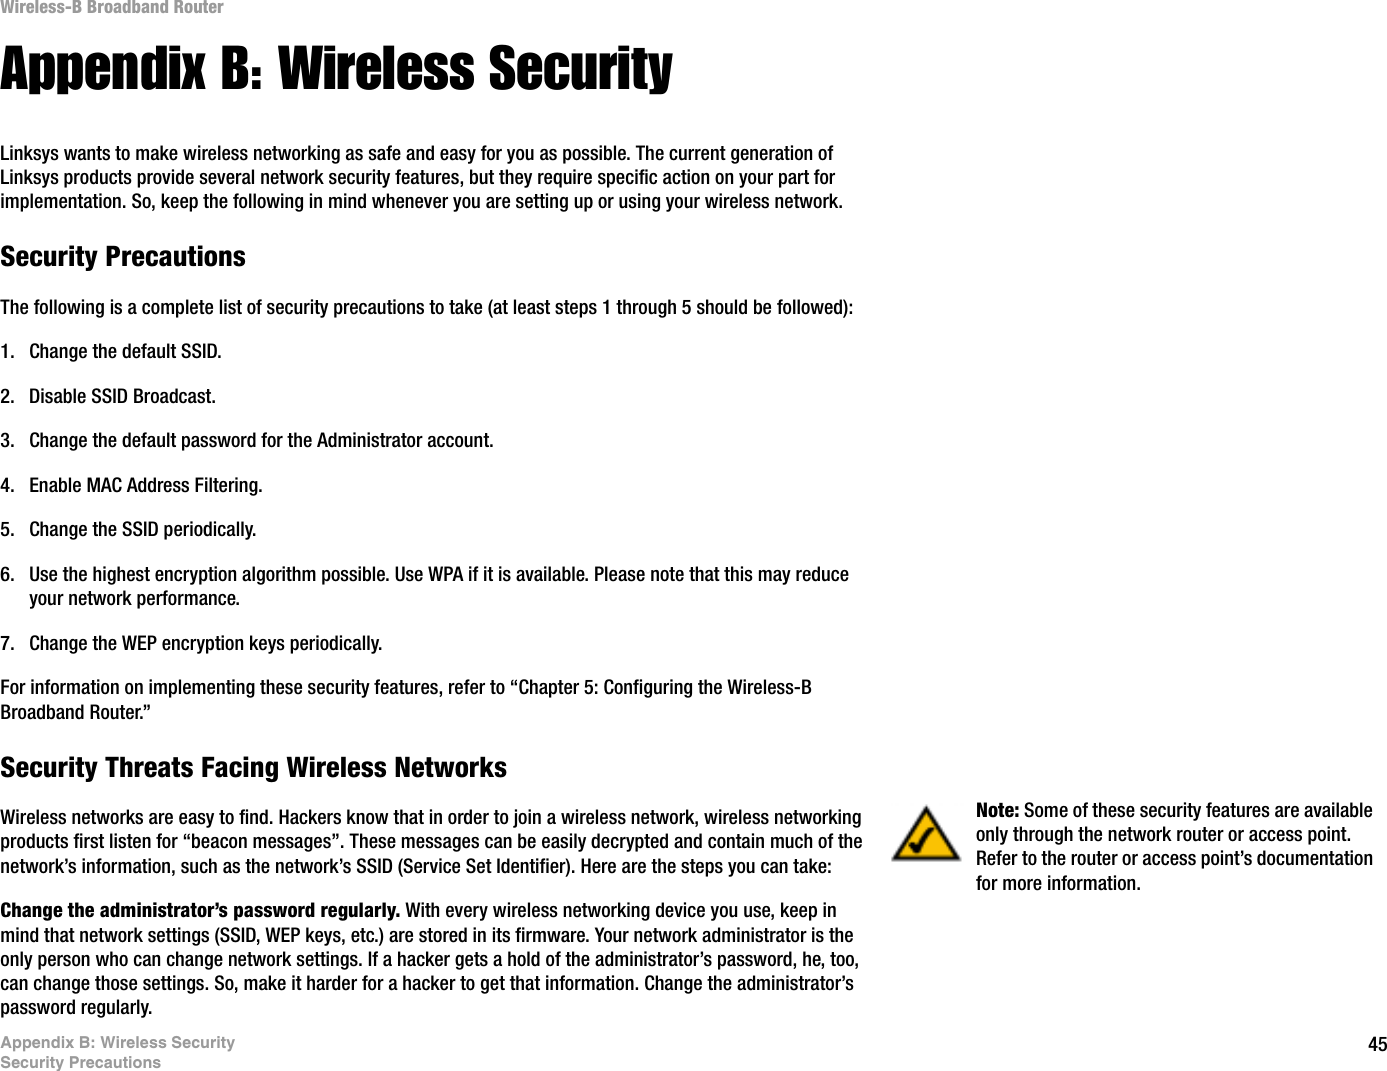 45Appendix B: Wireless SecuritySecurity PrecautionsWireless-B Broadband RouterAppendix B: Wireless SecurityLinksys wants to make wireless networking as safe and easy for you as possible. The current generation of Linksys products provide several network security features, but they require specific action on your part for implementation. So, keep the following in mind whenever you are setting up or using your wireless network.Security PrecautionsThe following is a complete list of security precautions to take (at least steps 1 through 5 should be followed):1. Change the default SSID. 2. Disable SSID Broadcast. 3. Change the default password for the Administrator account. 4. Enable MAC Address Filtering. 5. Change the SSID periodically. 6. Use the highest encryption algorithm possible. Use WPA if it is available. Please note that this may reduce your network performance. 7. Change the WEP encryption keys periodically. For information on implementing these security features, refer to “Chapter 5: Configuring the Wireless-B Broadband Router.”Security Threats Facing Wireless Networks Wireless networks are easy to find. Hackers know that in order to join a wireless network, wireless networking products first listen for “beacon messages”. These messages can be easily decrypted and contain much of the network’s information, such as the network’s SSID (Service Set Identifier). Here are the steps you can take:Change the administrator’s password regularly. With every wireless networking device you use, keep in mind that network settings (SSID, WEP keys, etc.) are stored in its firmware. Your network administrator is the only person who can change network settings. If a hacker gets a hold of the administrator’s password, he, too, can change those settings. So, make it harder for a hacker to get that information. Change the administrator’s password regularly.Note: Some of these security features are available only through the network router or access point. Refer to the router or access point’s documentation for more information.